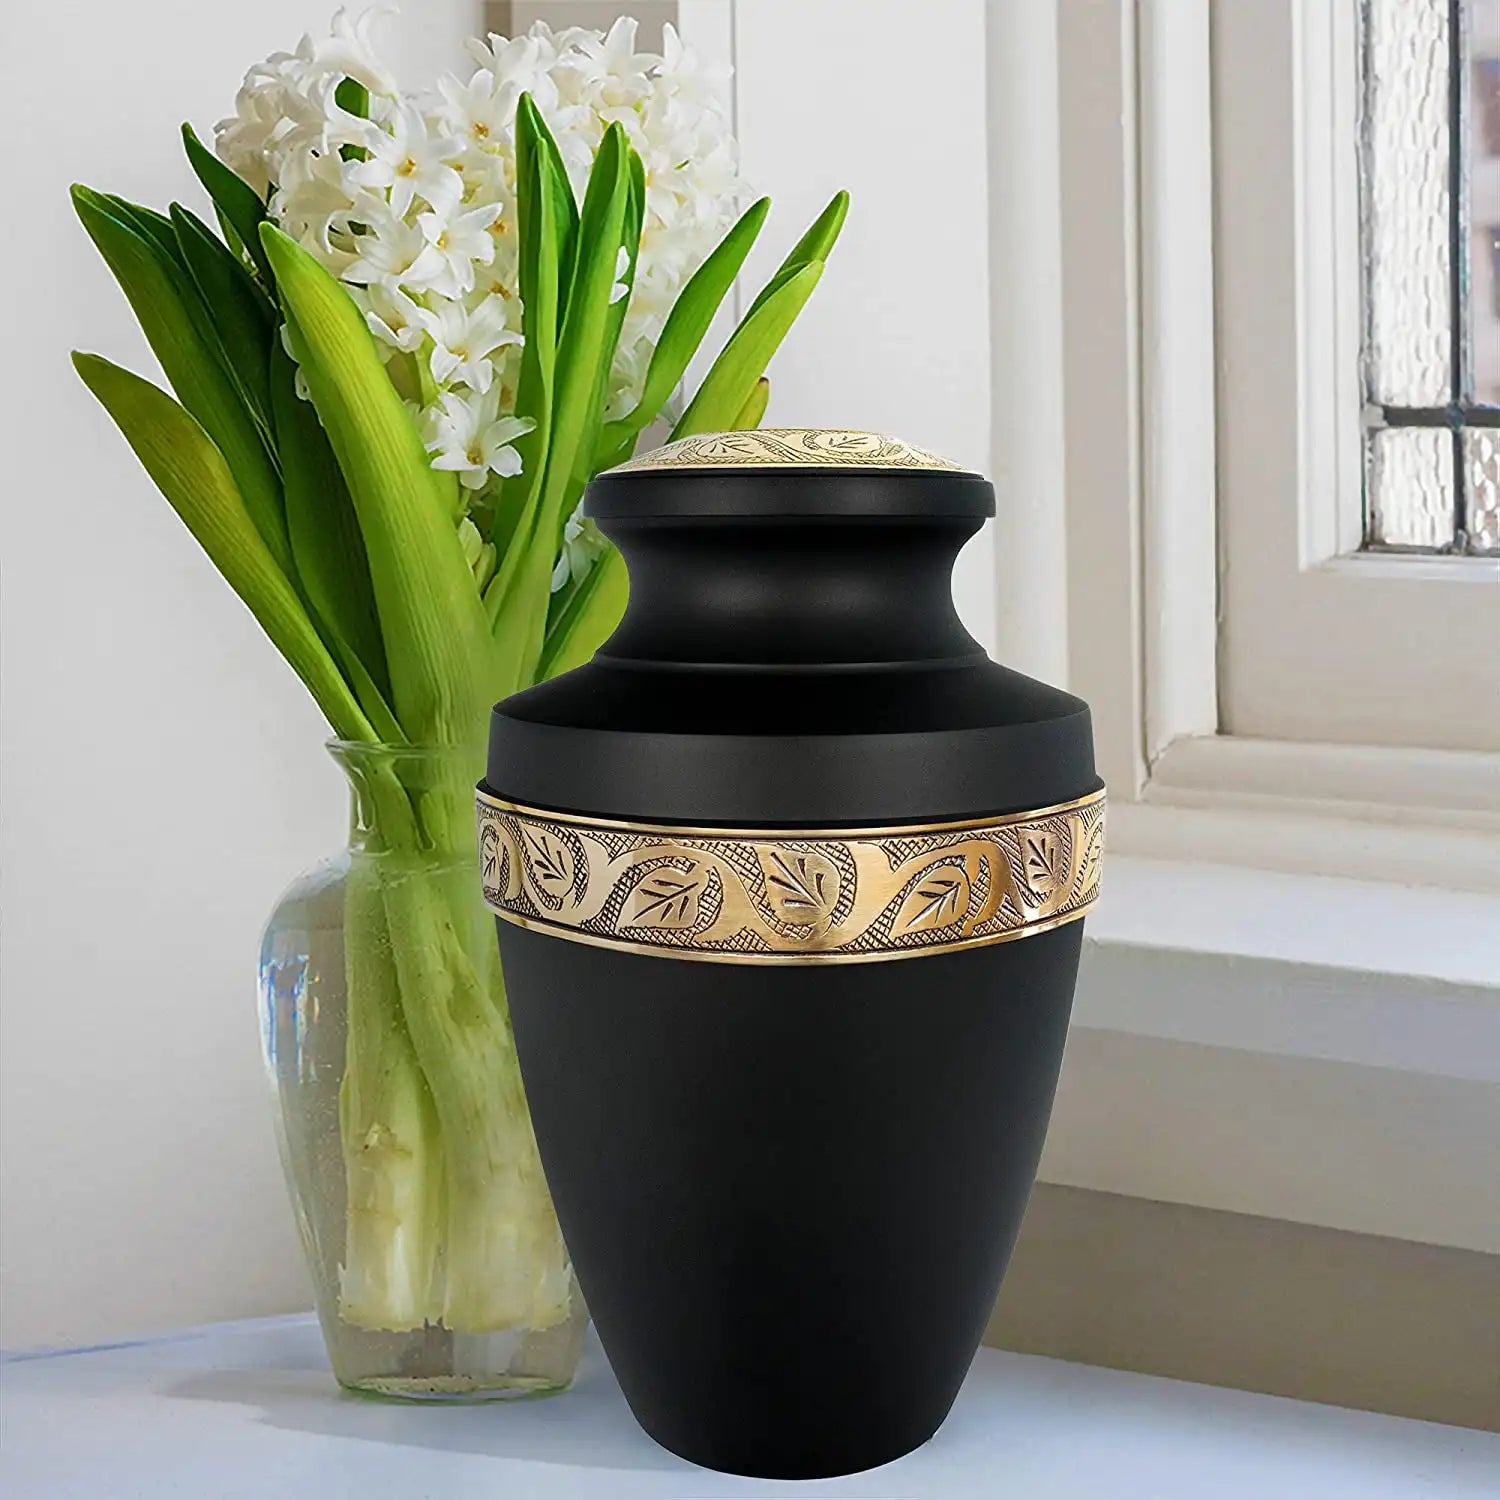 Black Urns for Ashes - Handcrafted Cremation Urn, Large Burial Urns for Ashes Adult Male - Urns for Human Ashes Adult Female, Funeral Decorative Urns - Black Urn, Up to 200 LBS